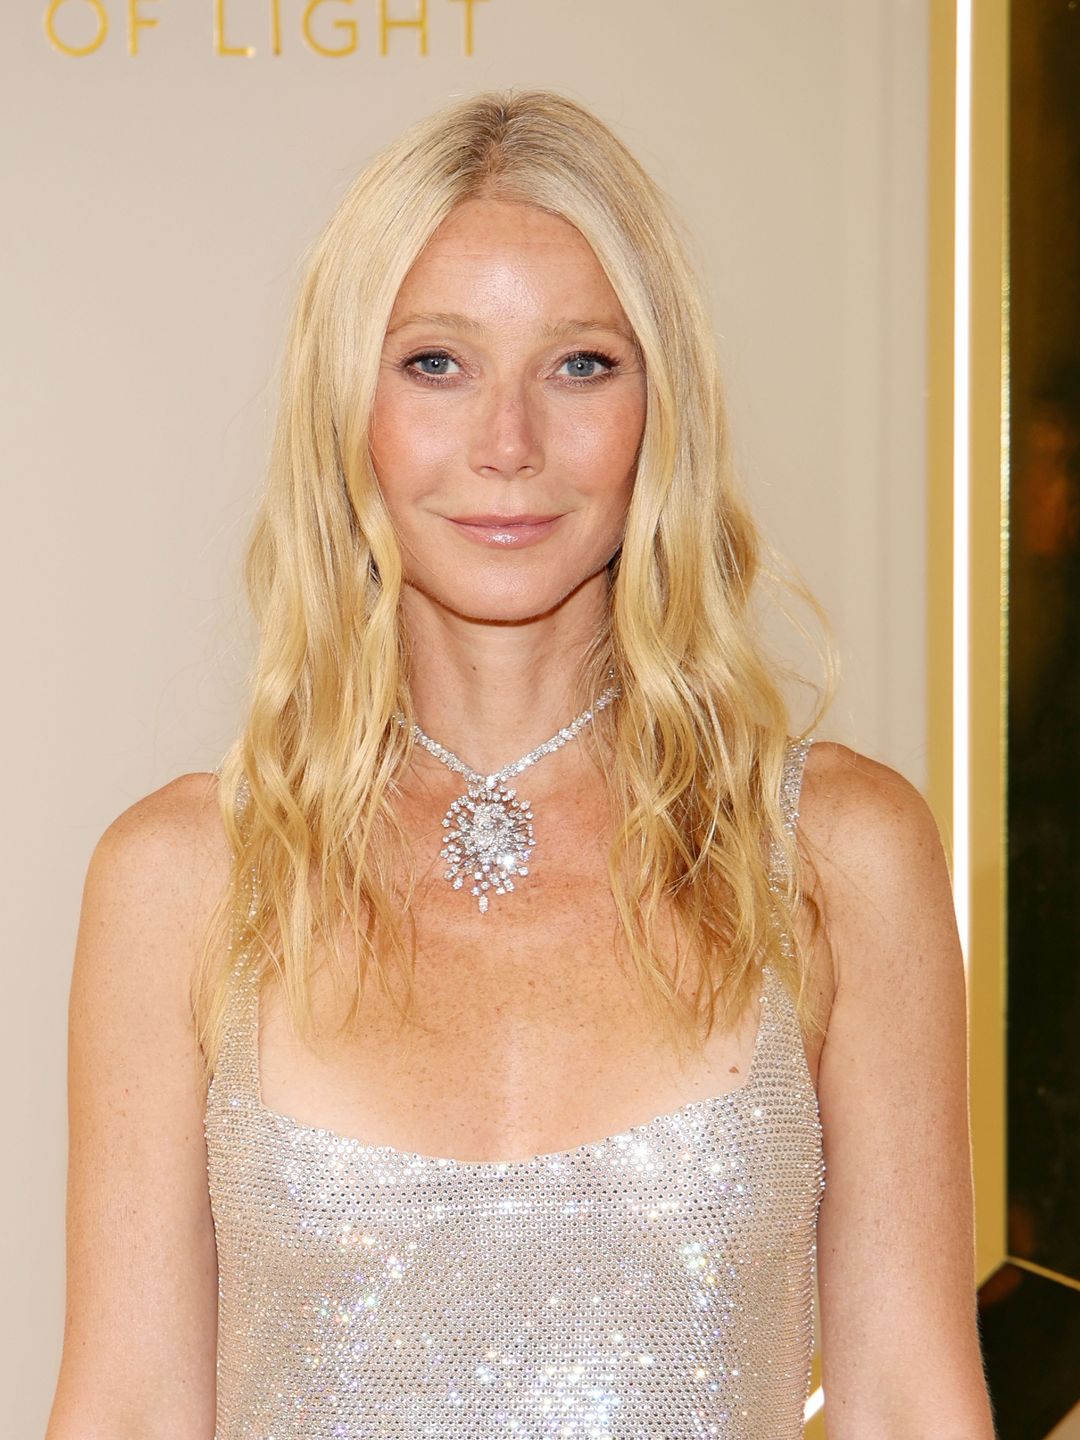 Gwyneth Paltrow joins Swarovski "Lords of the Light - From Vienna to Milan" Exhibition opening during Milan Fashion Week 